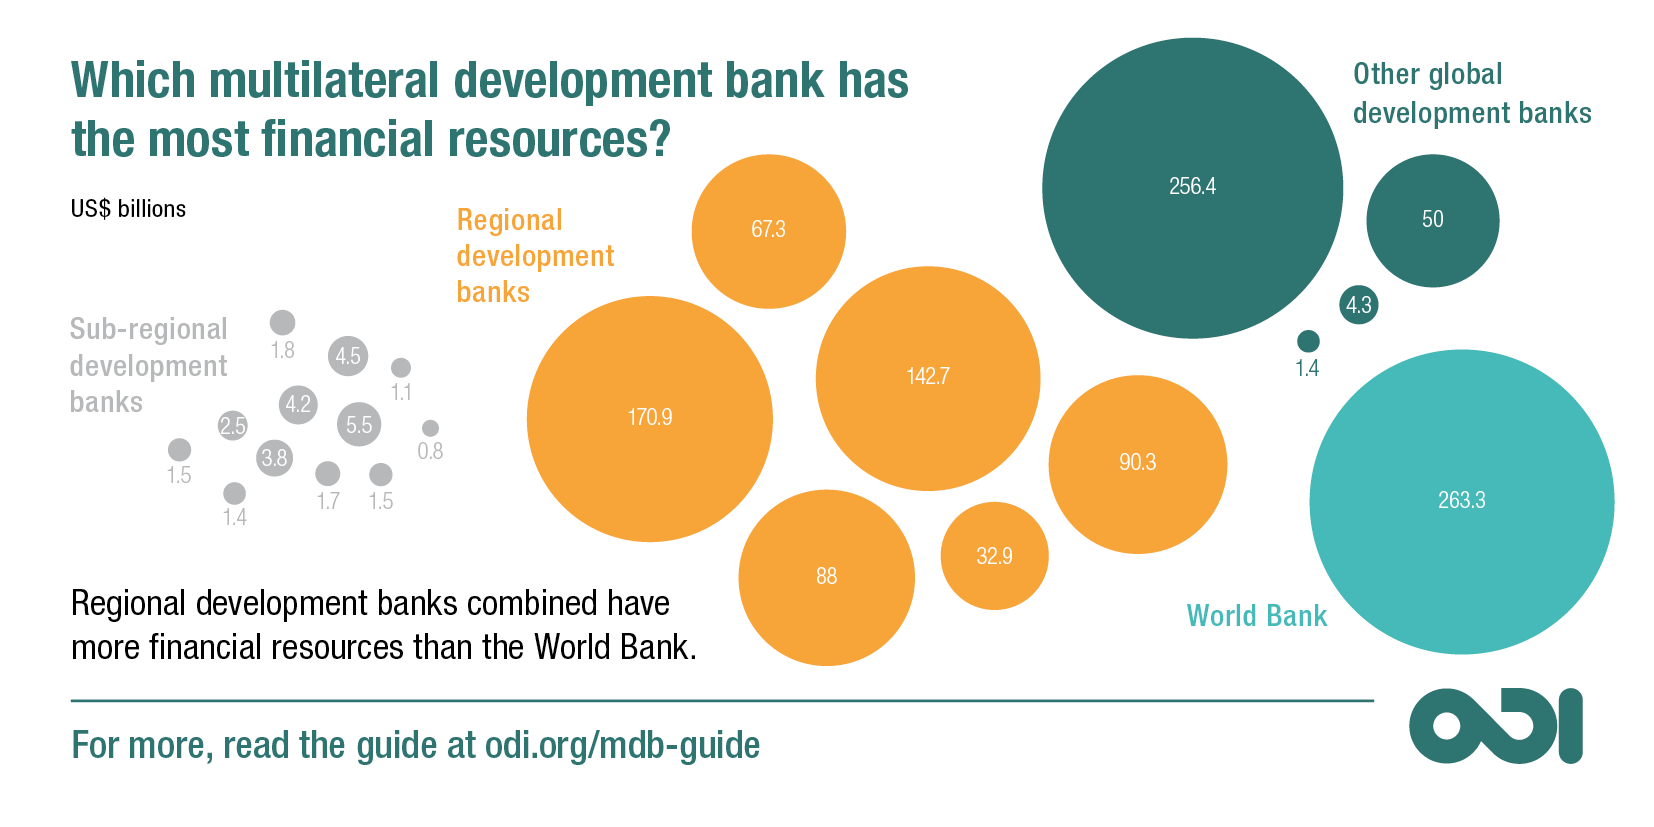 Which multilateral development bank has the most financial resources?